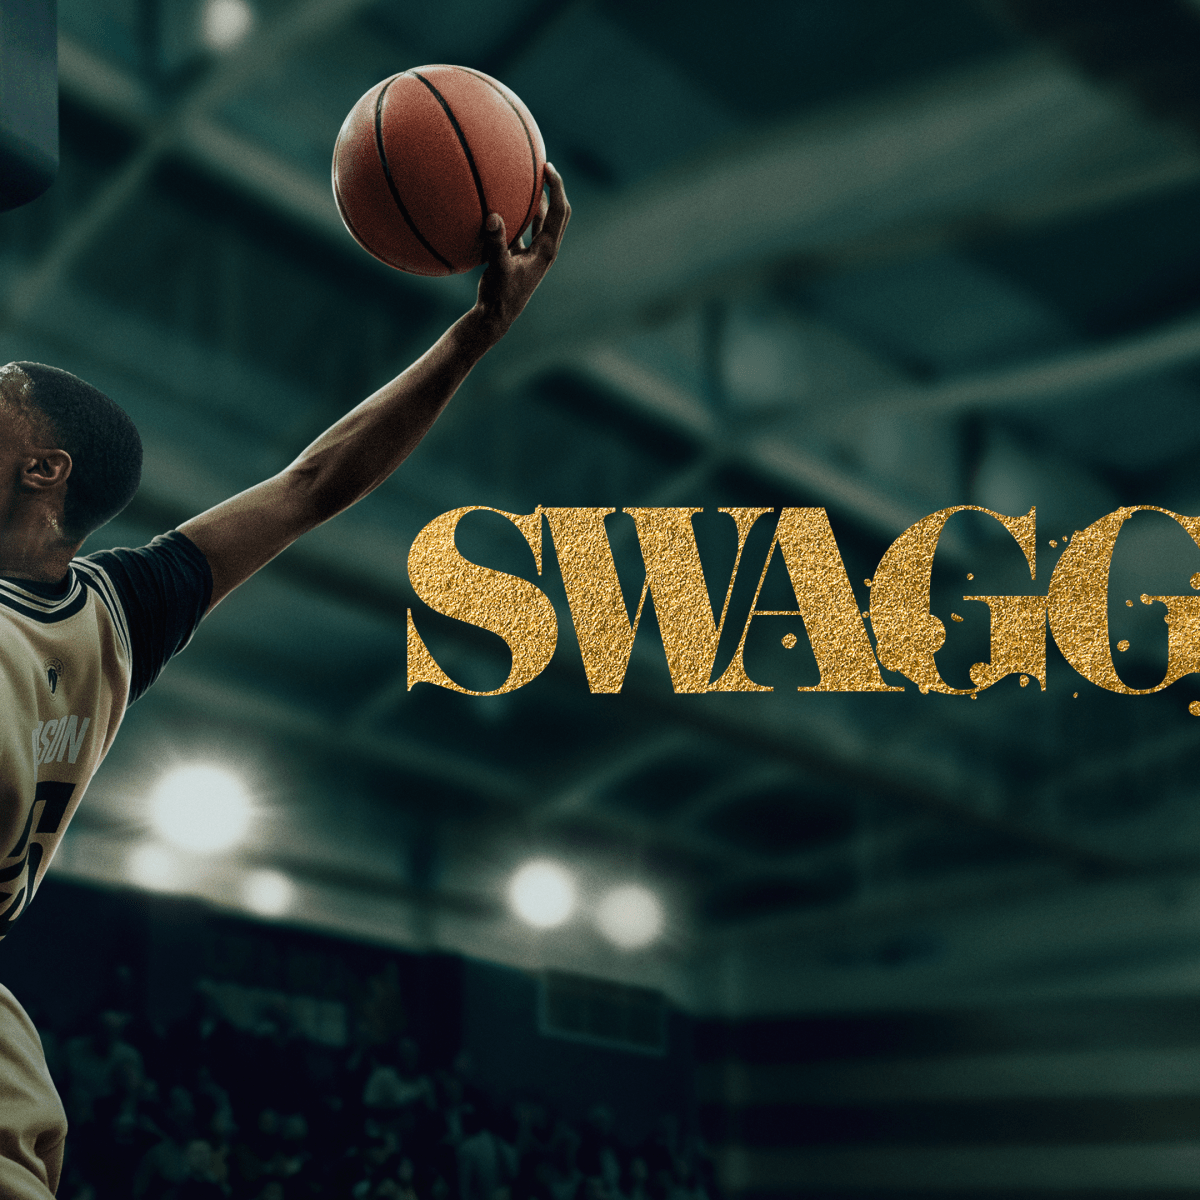 Swagger Season 2 Now Available to Stream on Apple TV+